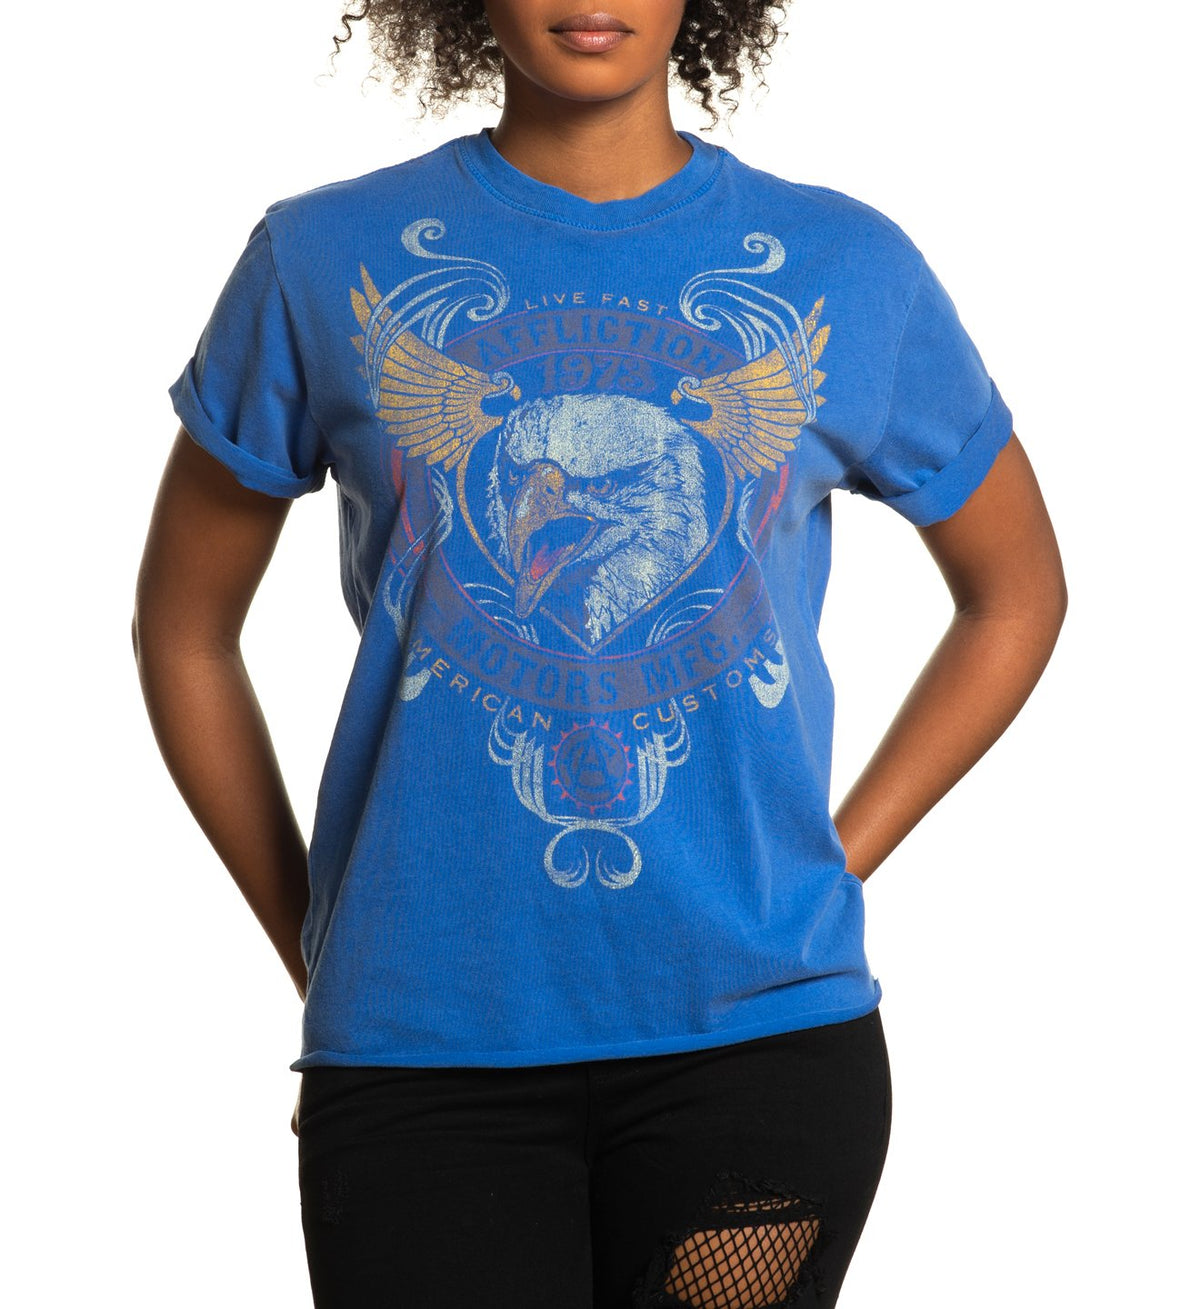 Ac Intervention - Womens Short Sleeve Tees - Affliction Clothing